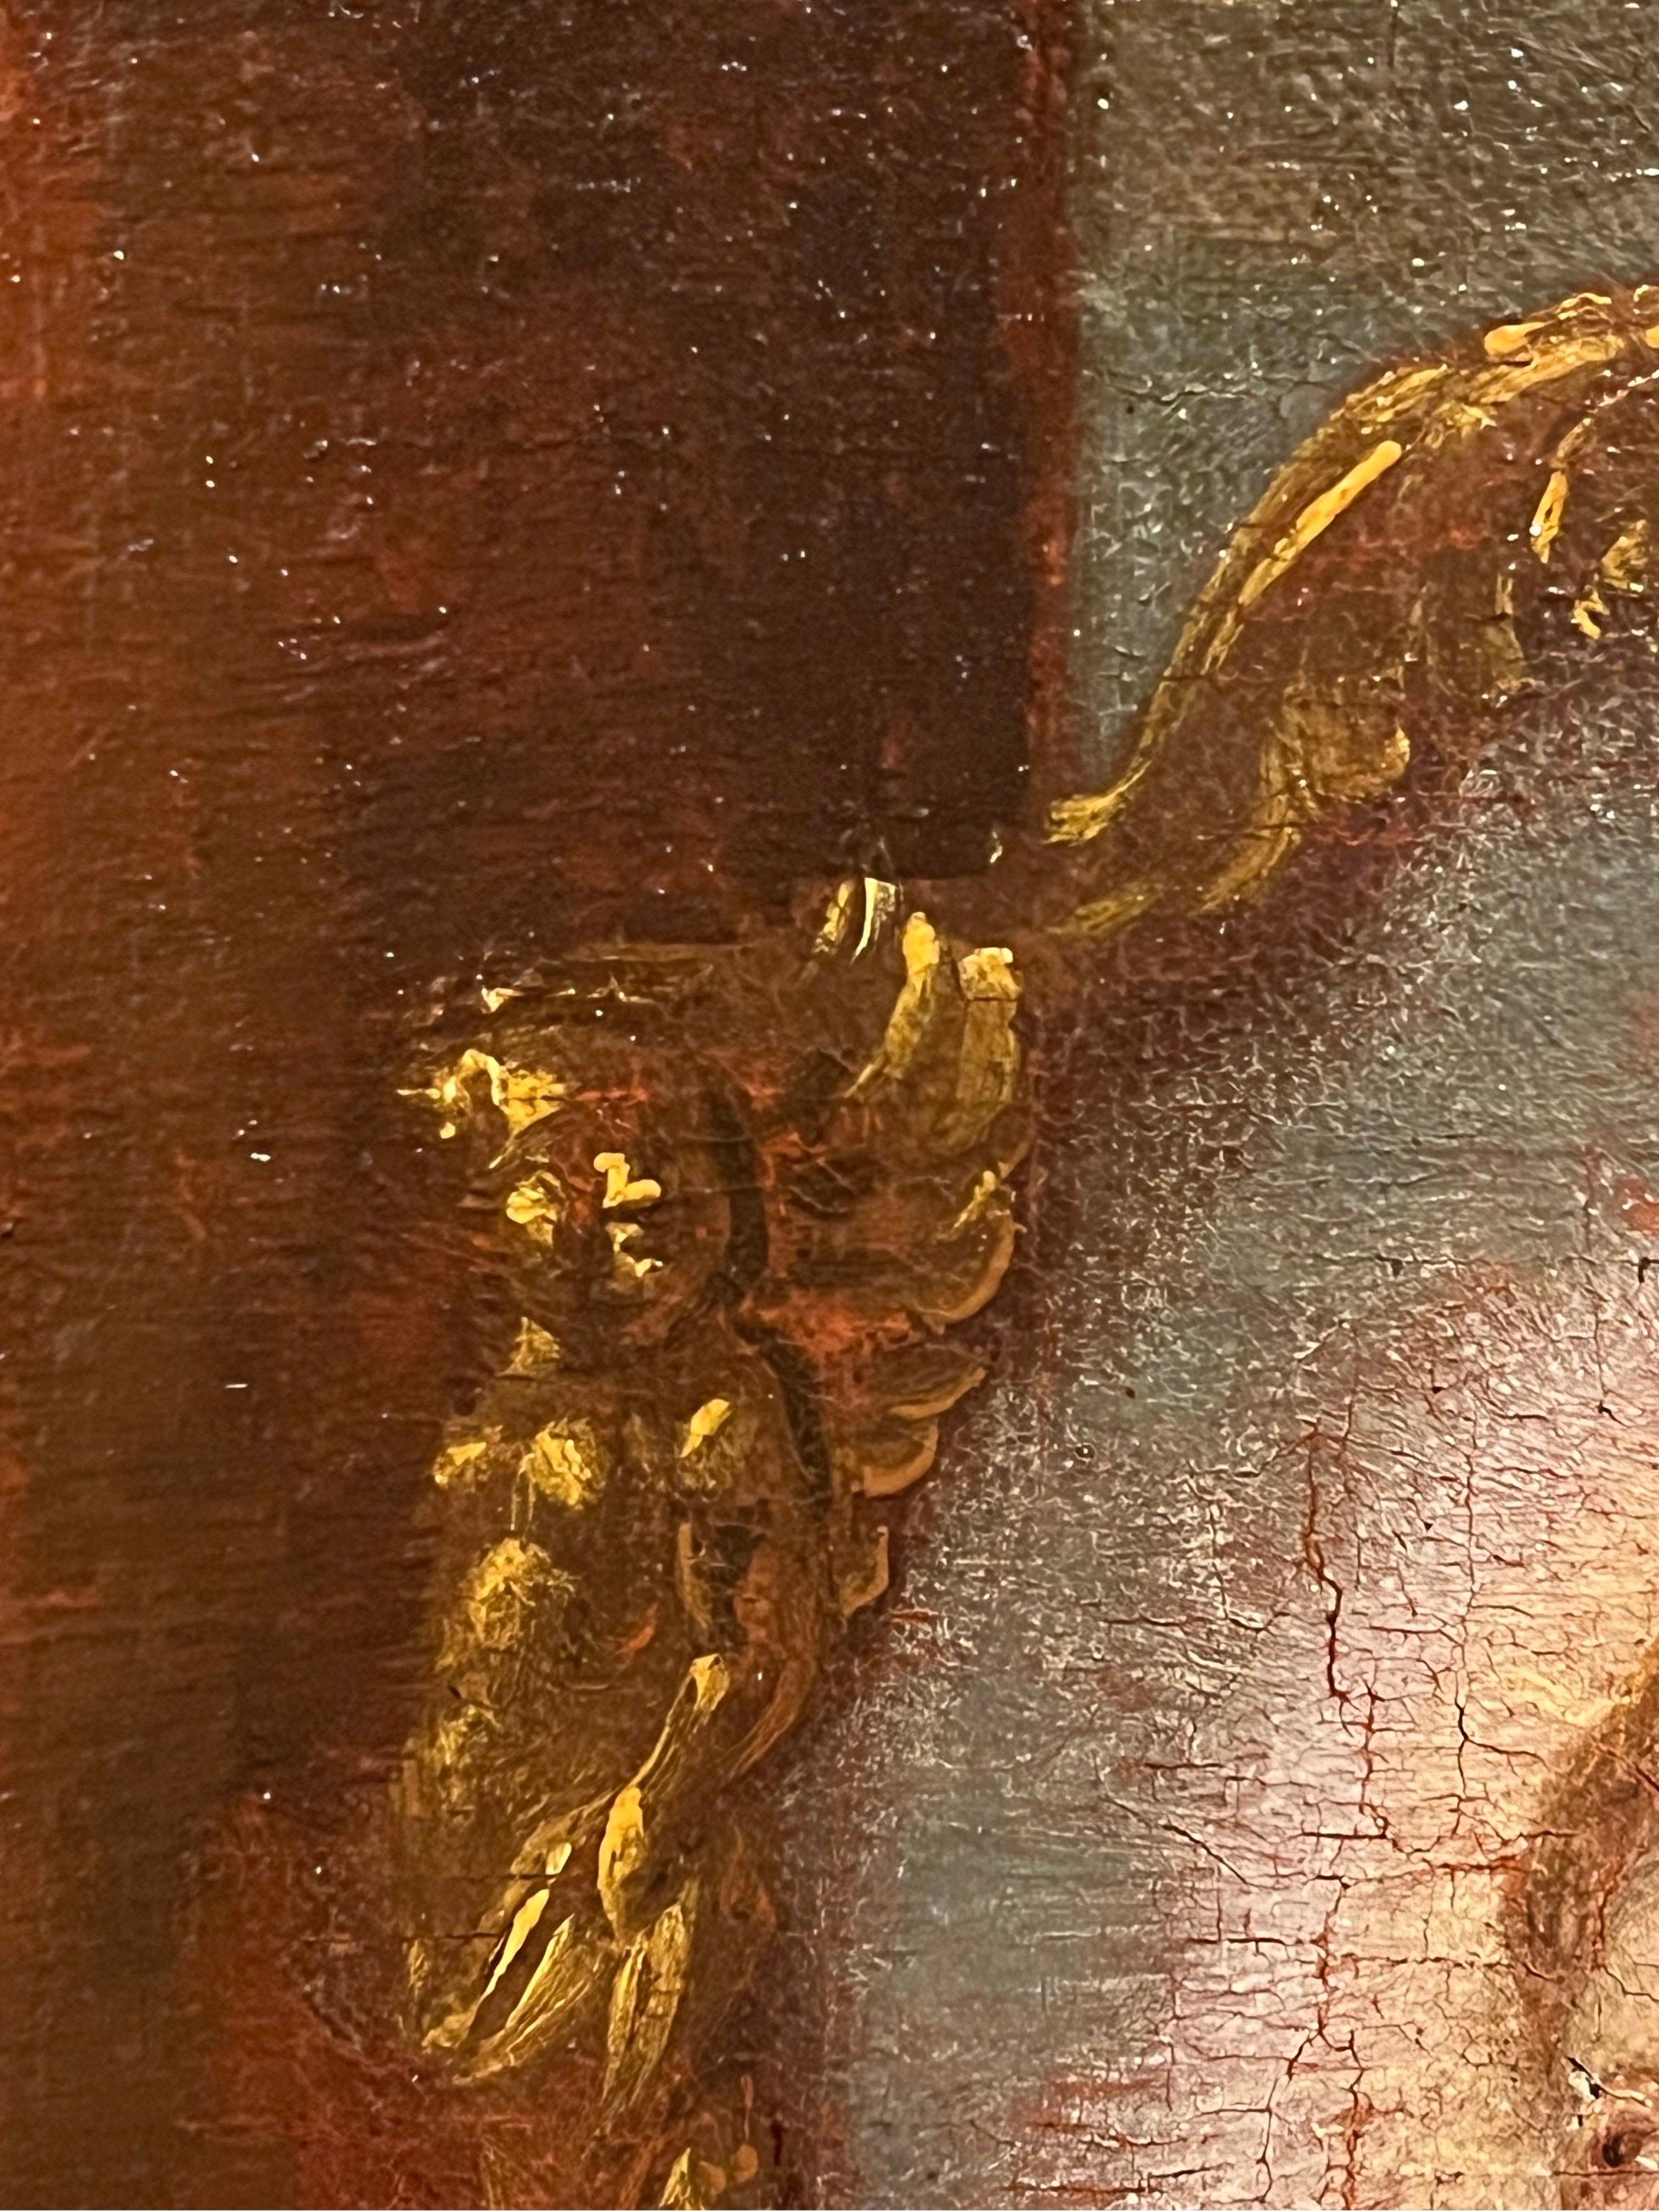 Late 17th, early 18th century old master oil painting depicting an allegory of Lady Justice holding demons at bay

Our painting, likely a sketch for a much larger work,, conveys a profound message encapsulated in the symbolism surrounding the figure